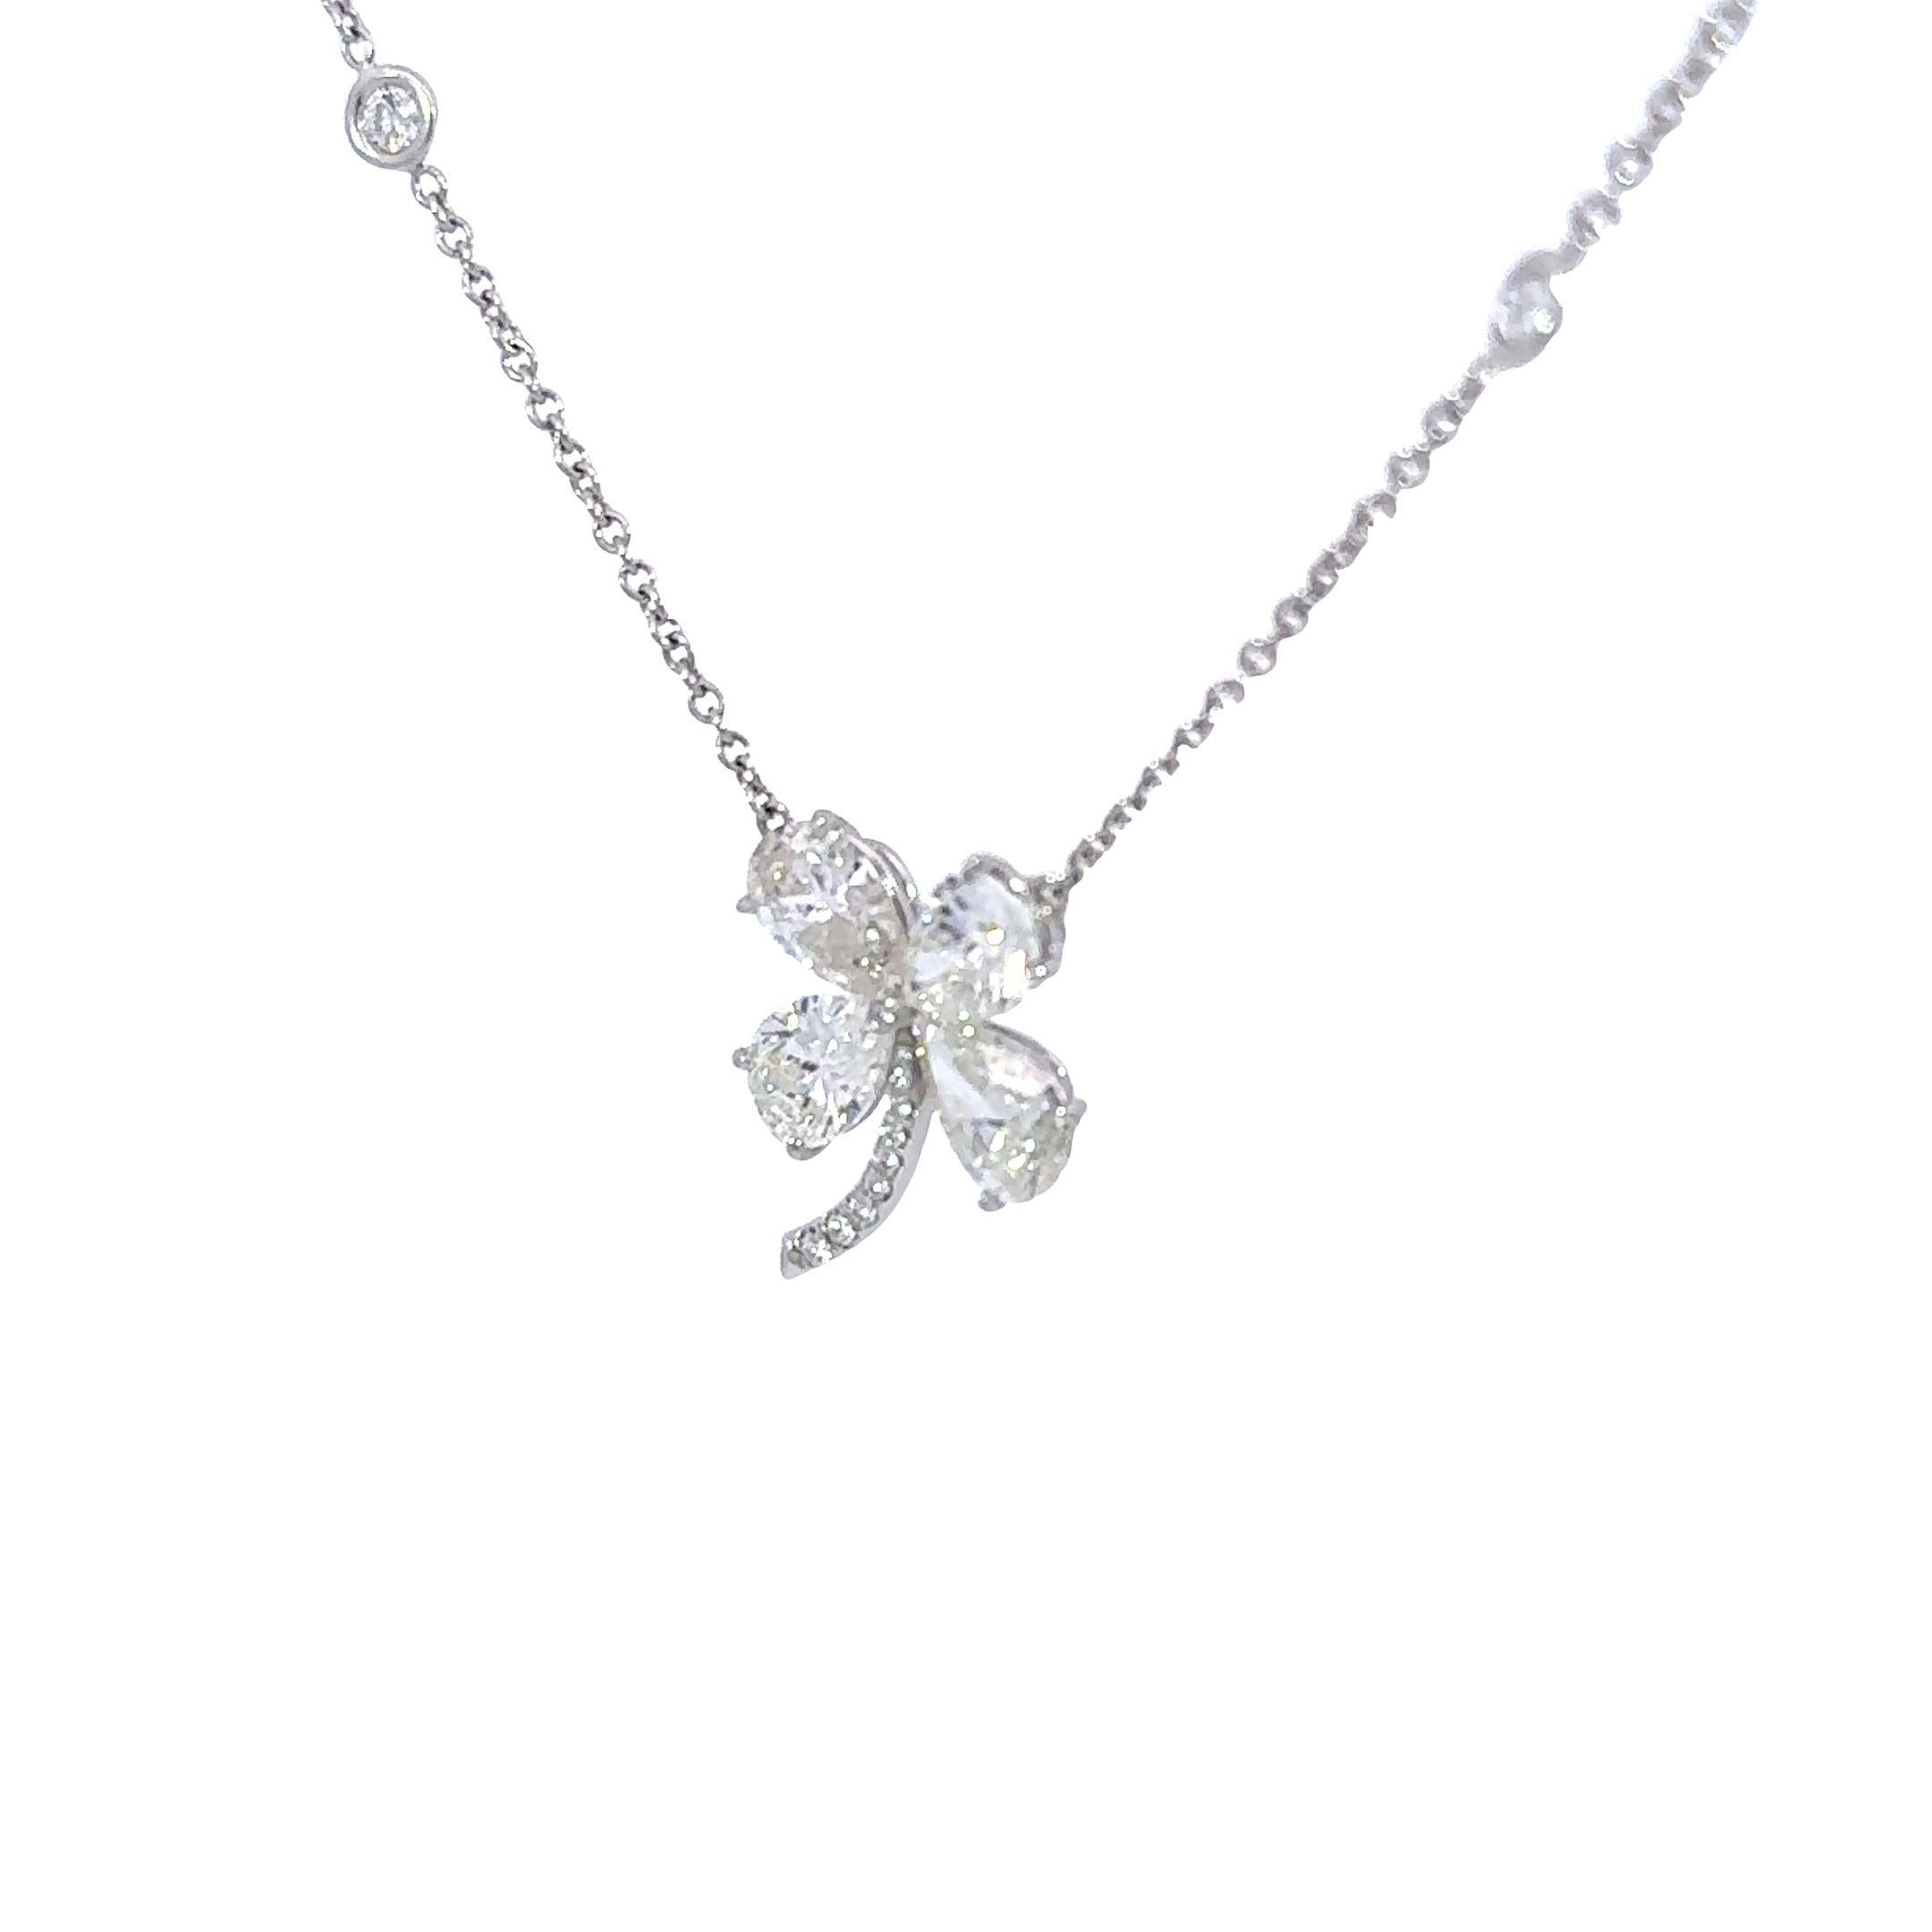 Discover our exquisite Four Leaf Clover Pendant, adorned with a dazzling 5-carat diamond, epitomizing timeless elegance and fortune. Crafted with meticulous attention to detail, this pendant showcases the intricate four leaf clover design,